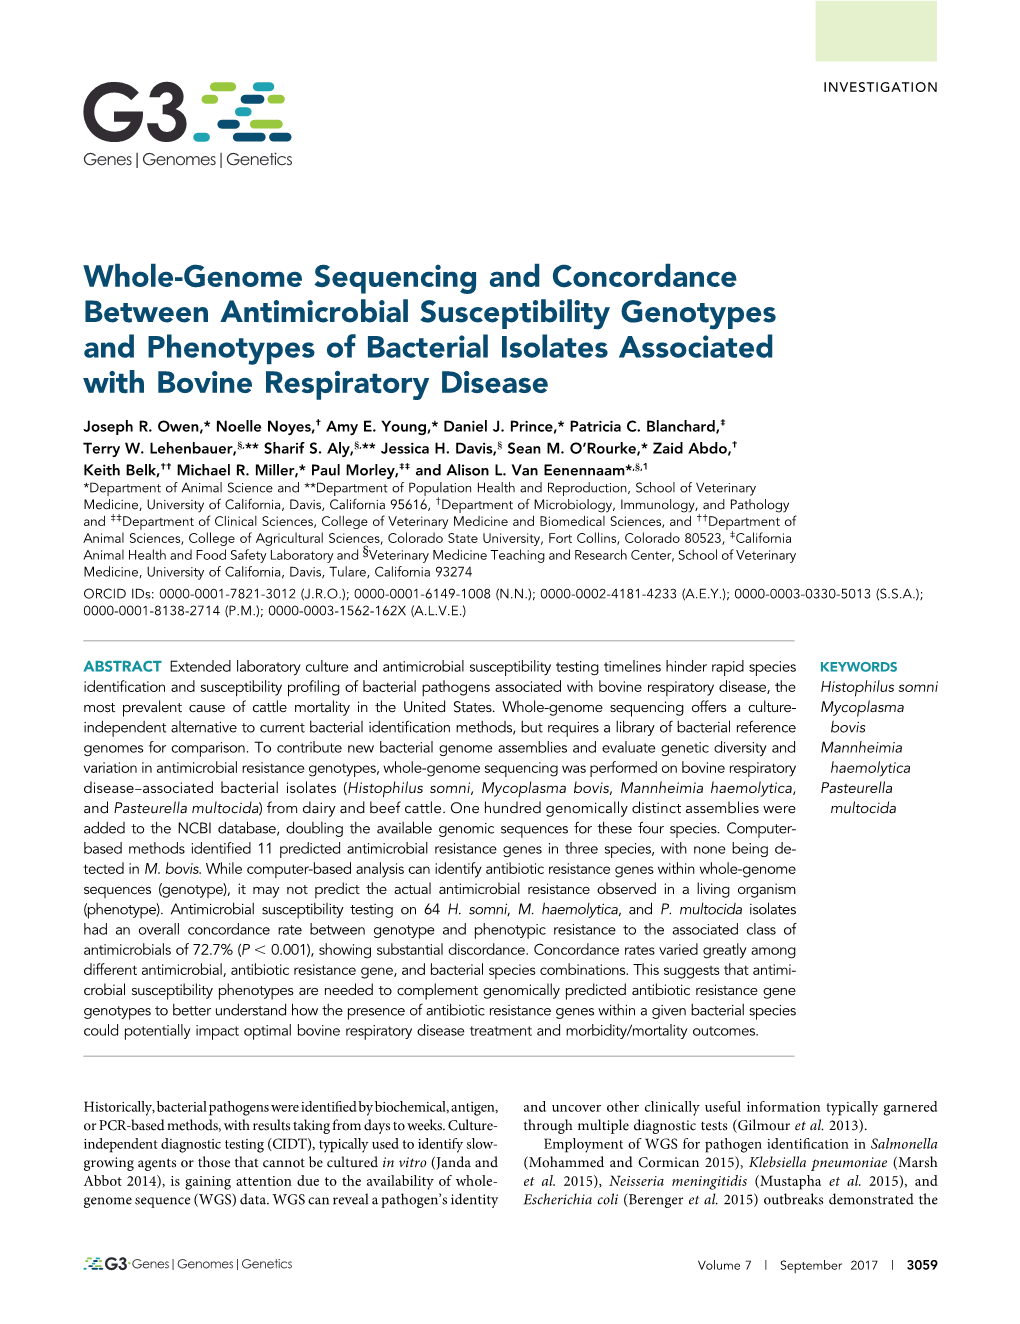 Whole-Genome Sequencing and Concordance Between Antimicrobial Susceptibility Genotypes and Phenotypes of Bacterial Isolates Associated with Bovine Respiratory Disease